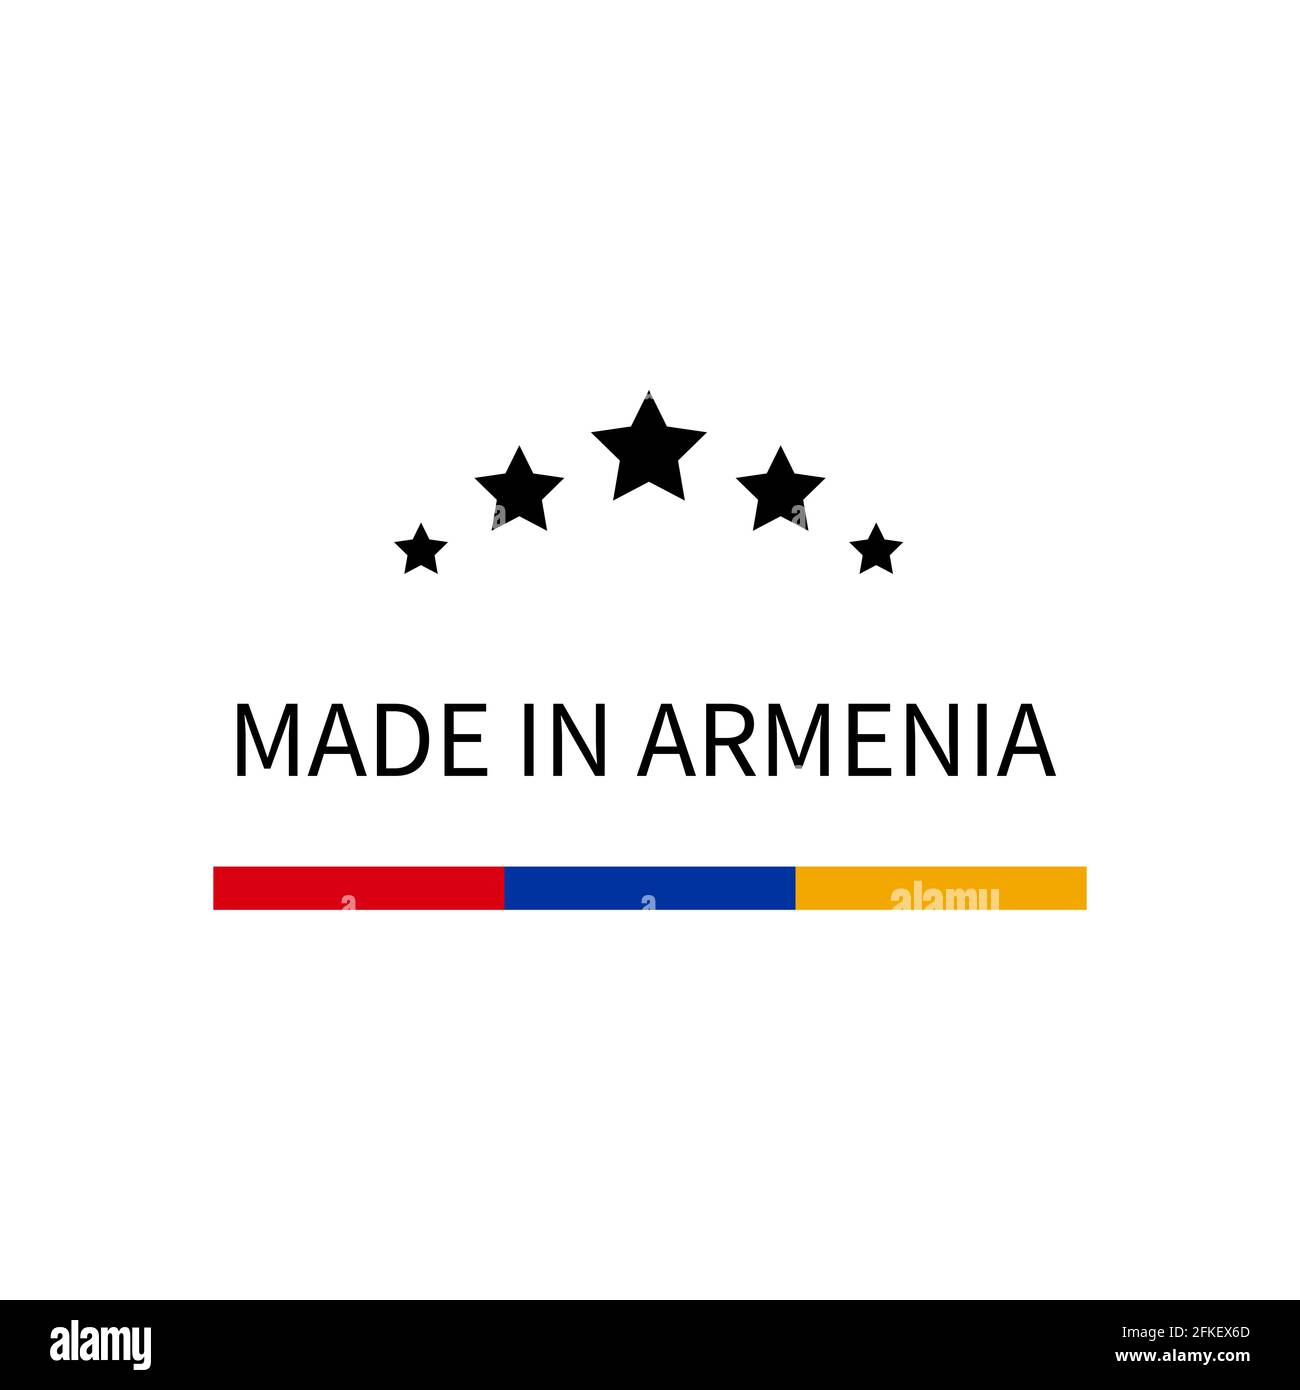 Made in Armenia label. Quality mark vector icon. Perfect for logo design, tags, badges, stickers, emblem, product packaging, etc. Stock Vector